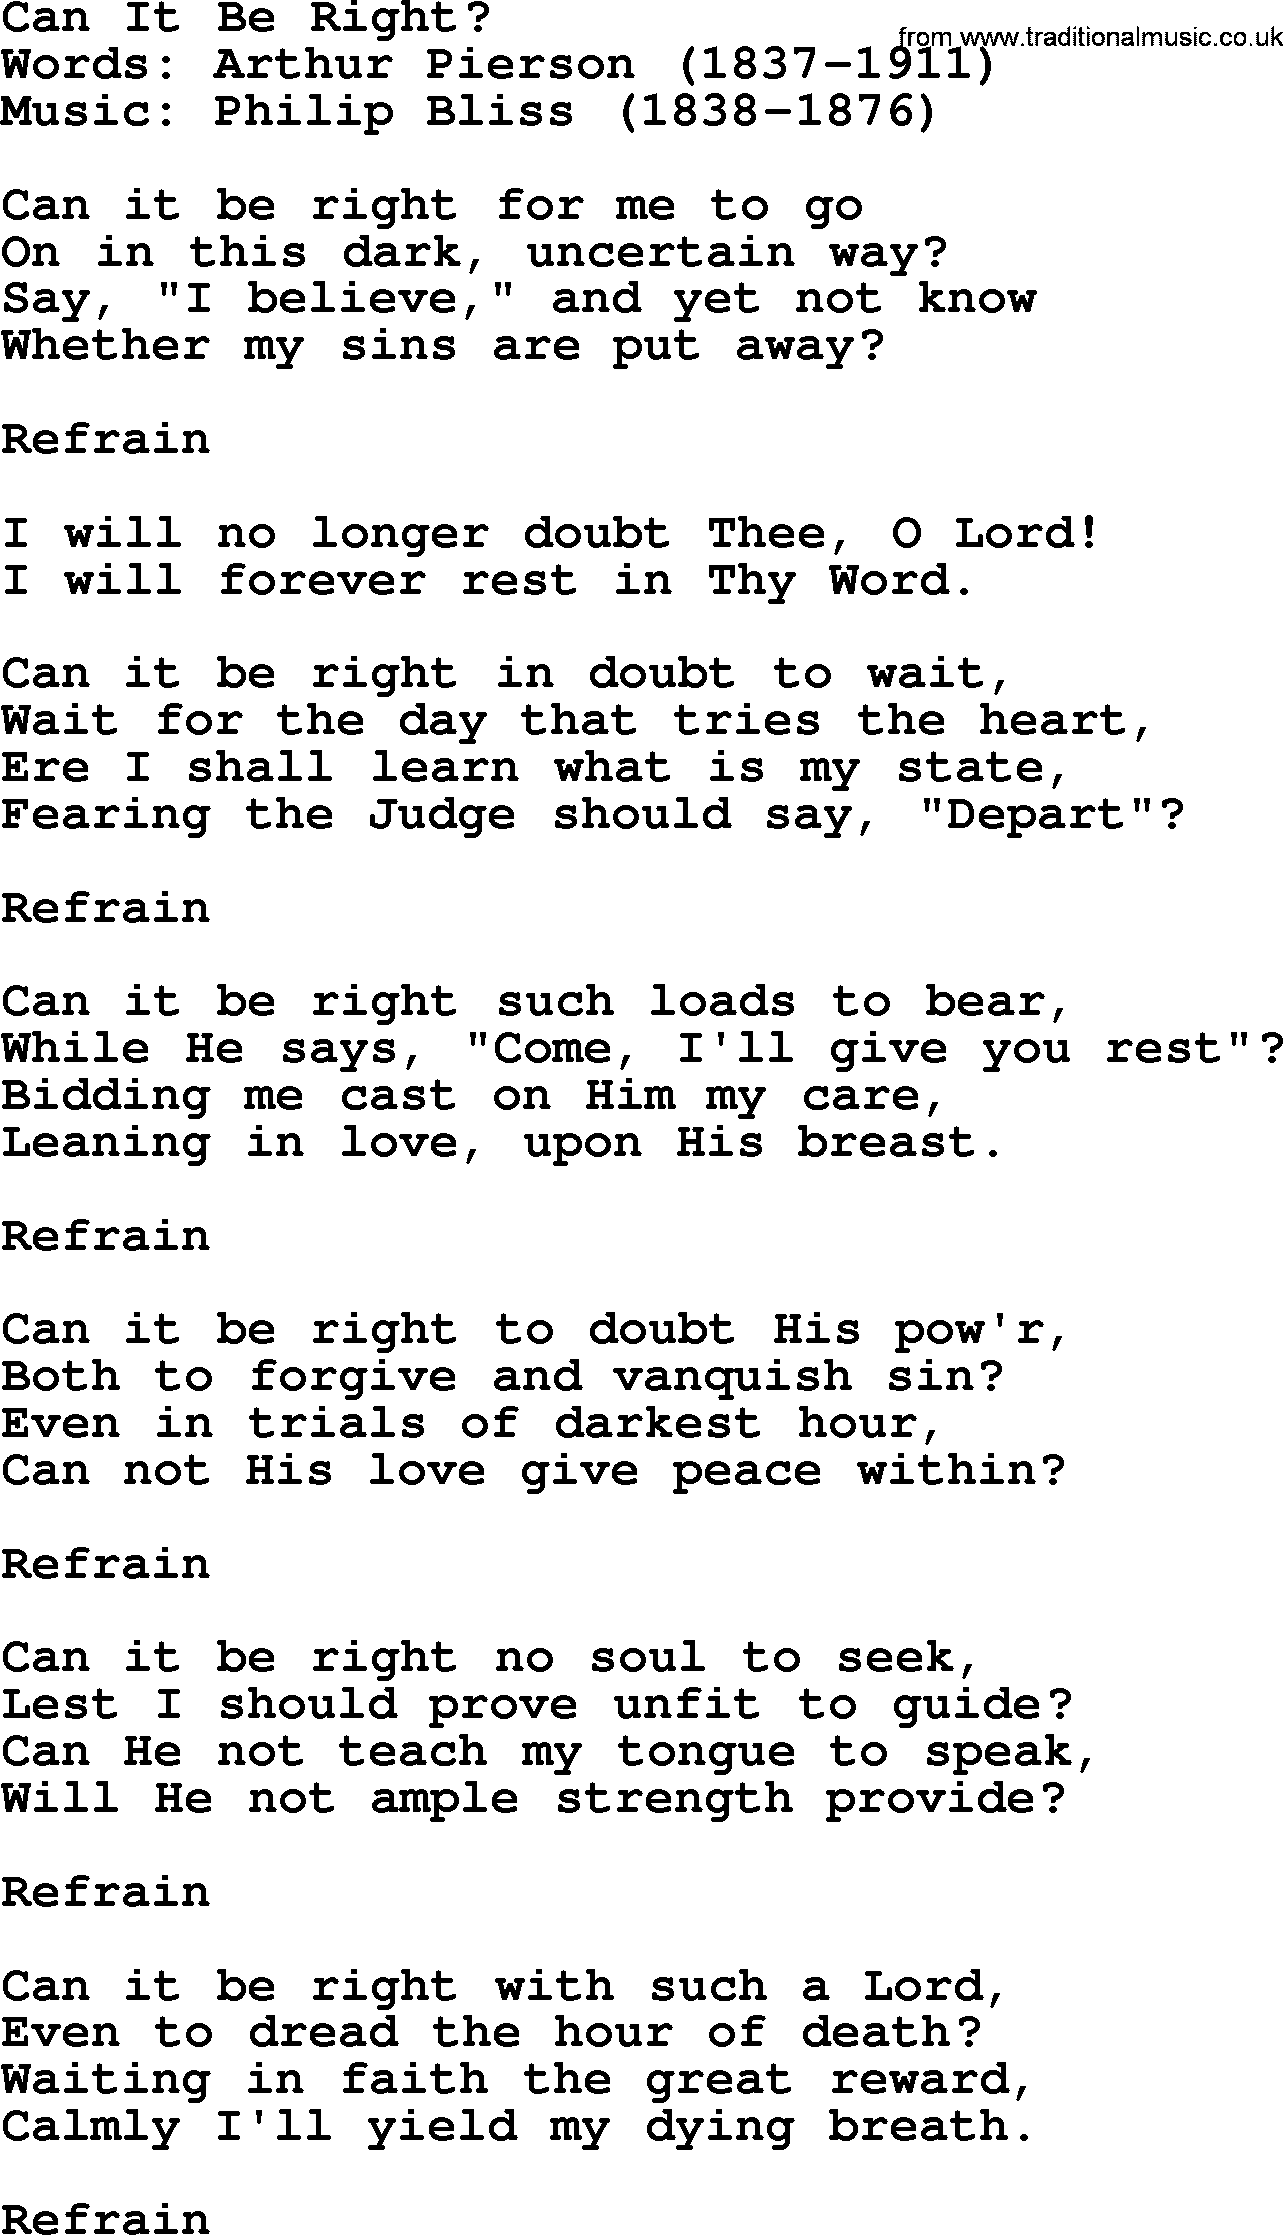 Philip Bliss Song: Can It Be Right, lyrics